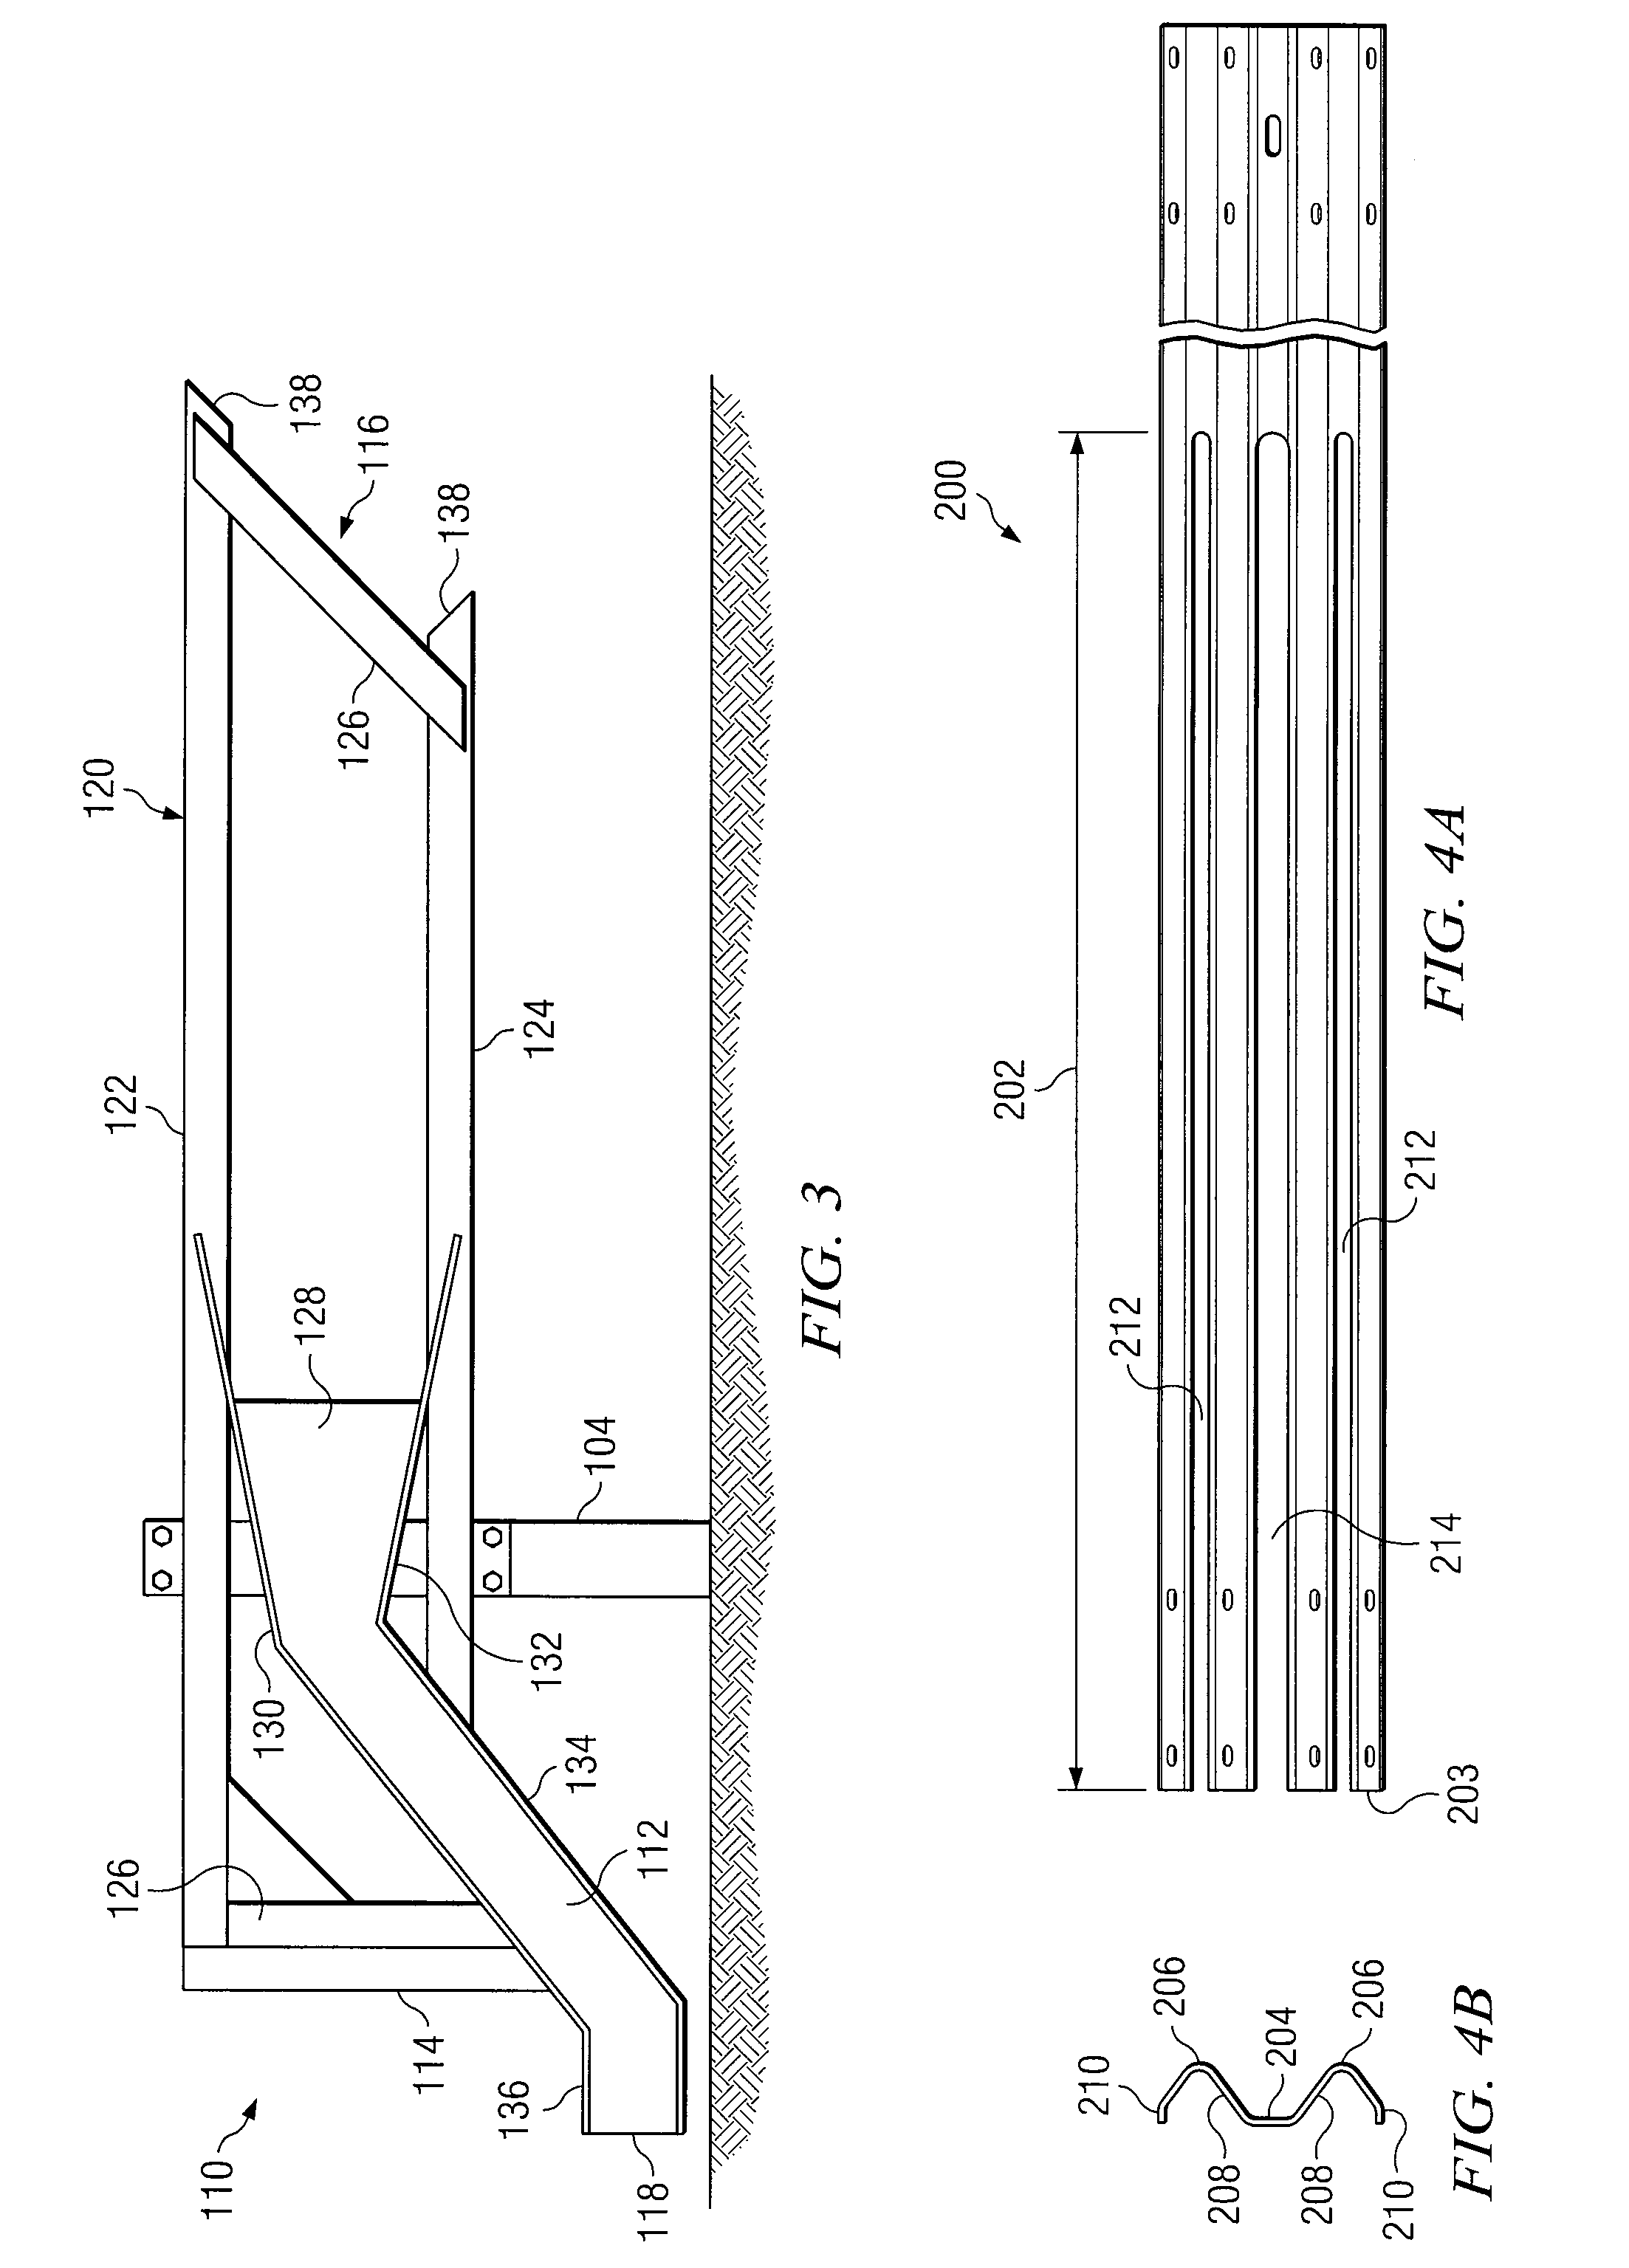 Guardrail safety system for dissipating energy to decelerate the impacting vehicle